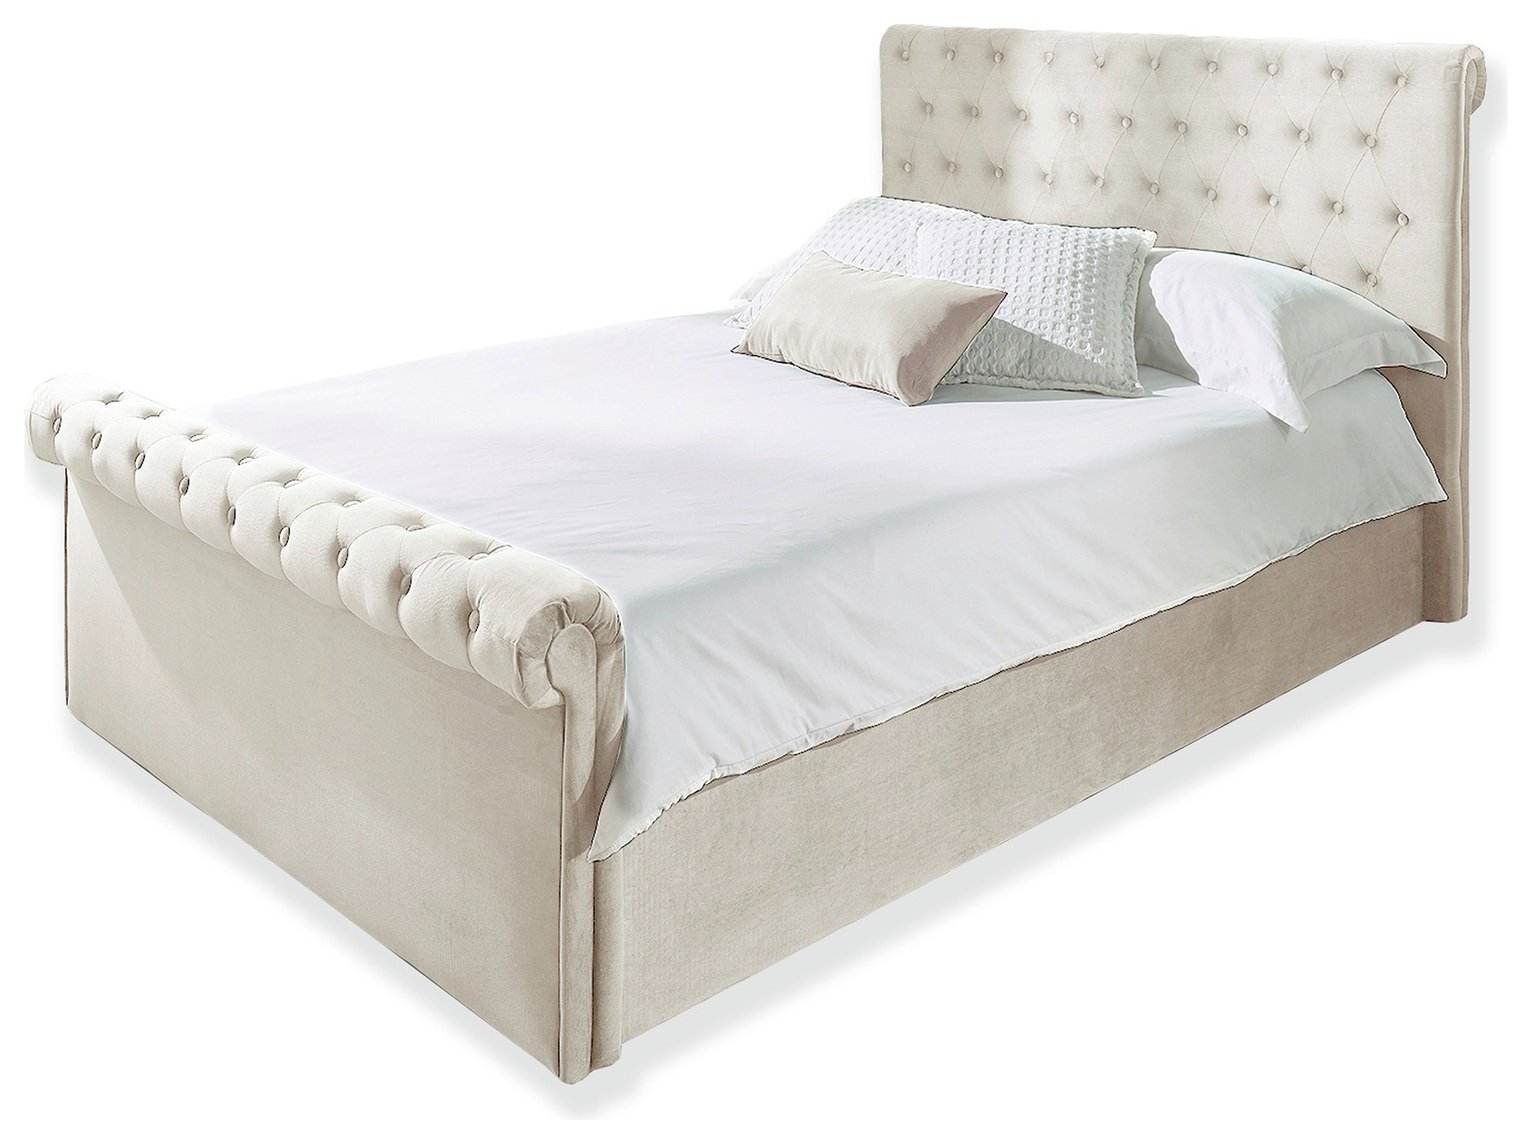 Aspire Chesterfield Double Ottoman Bed Frame - Natural